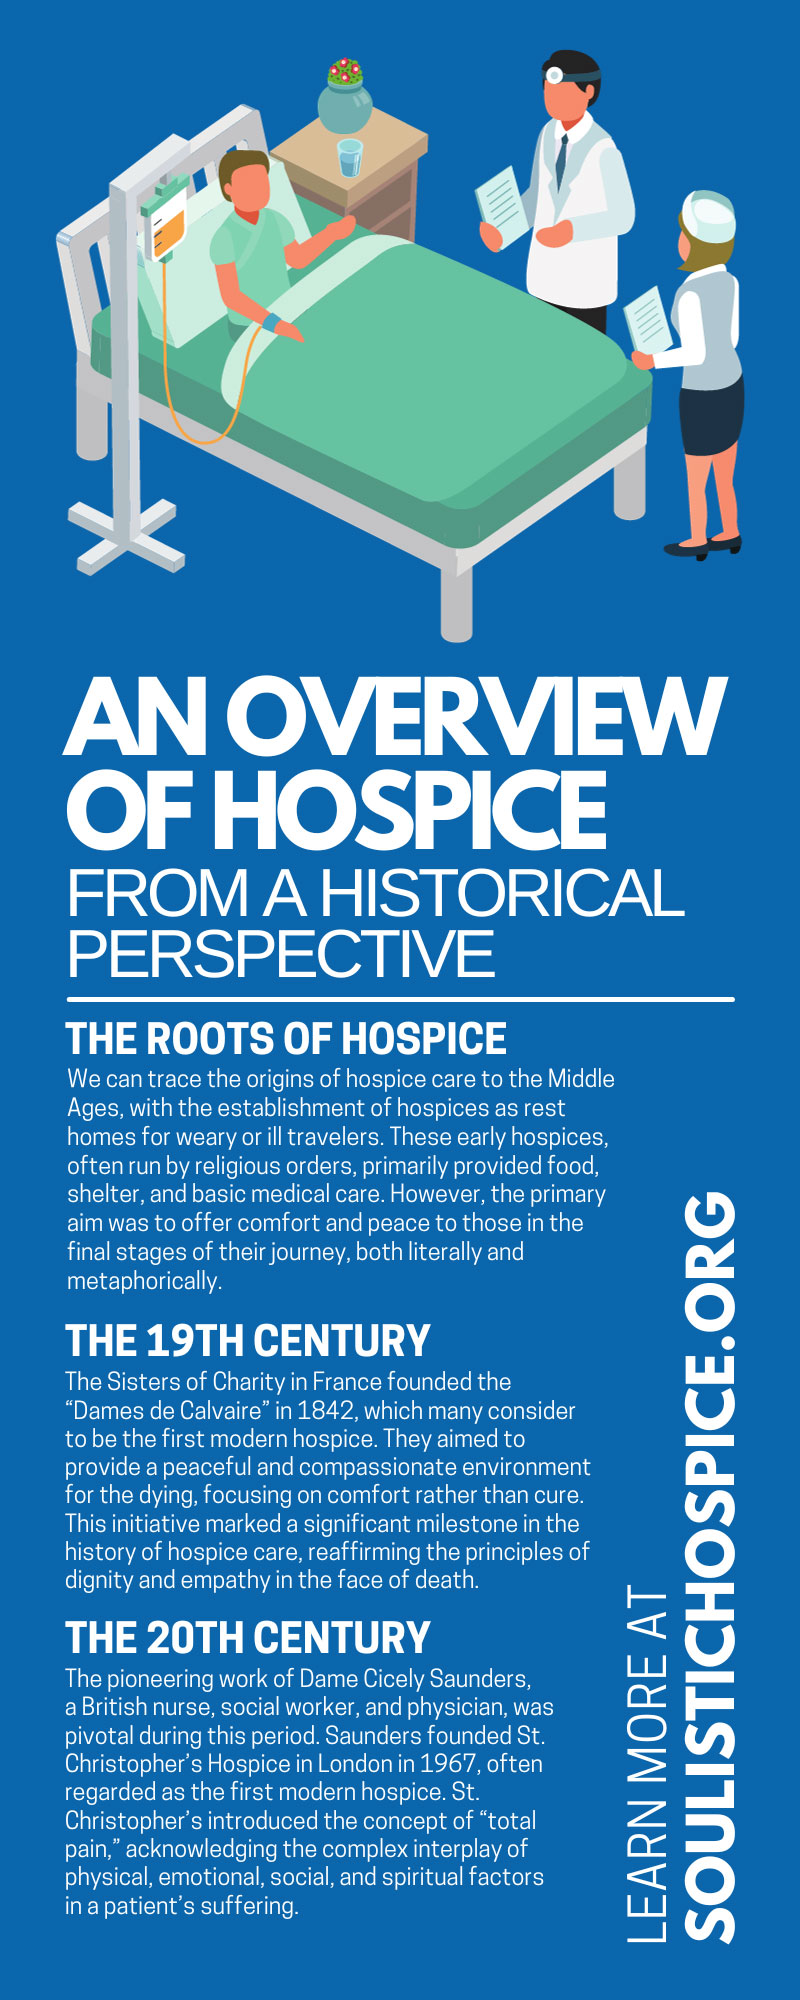 An Overview of Hospice From a Historical Perspective